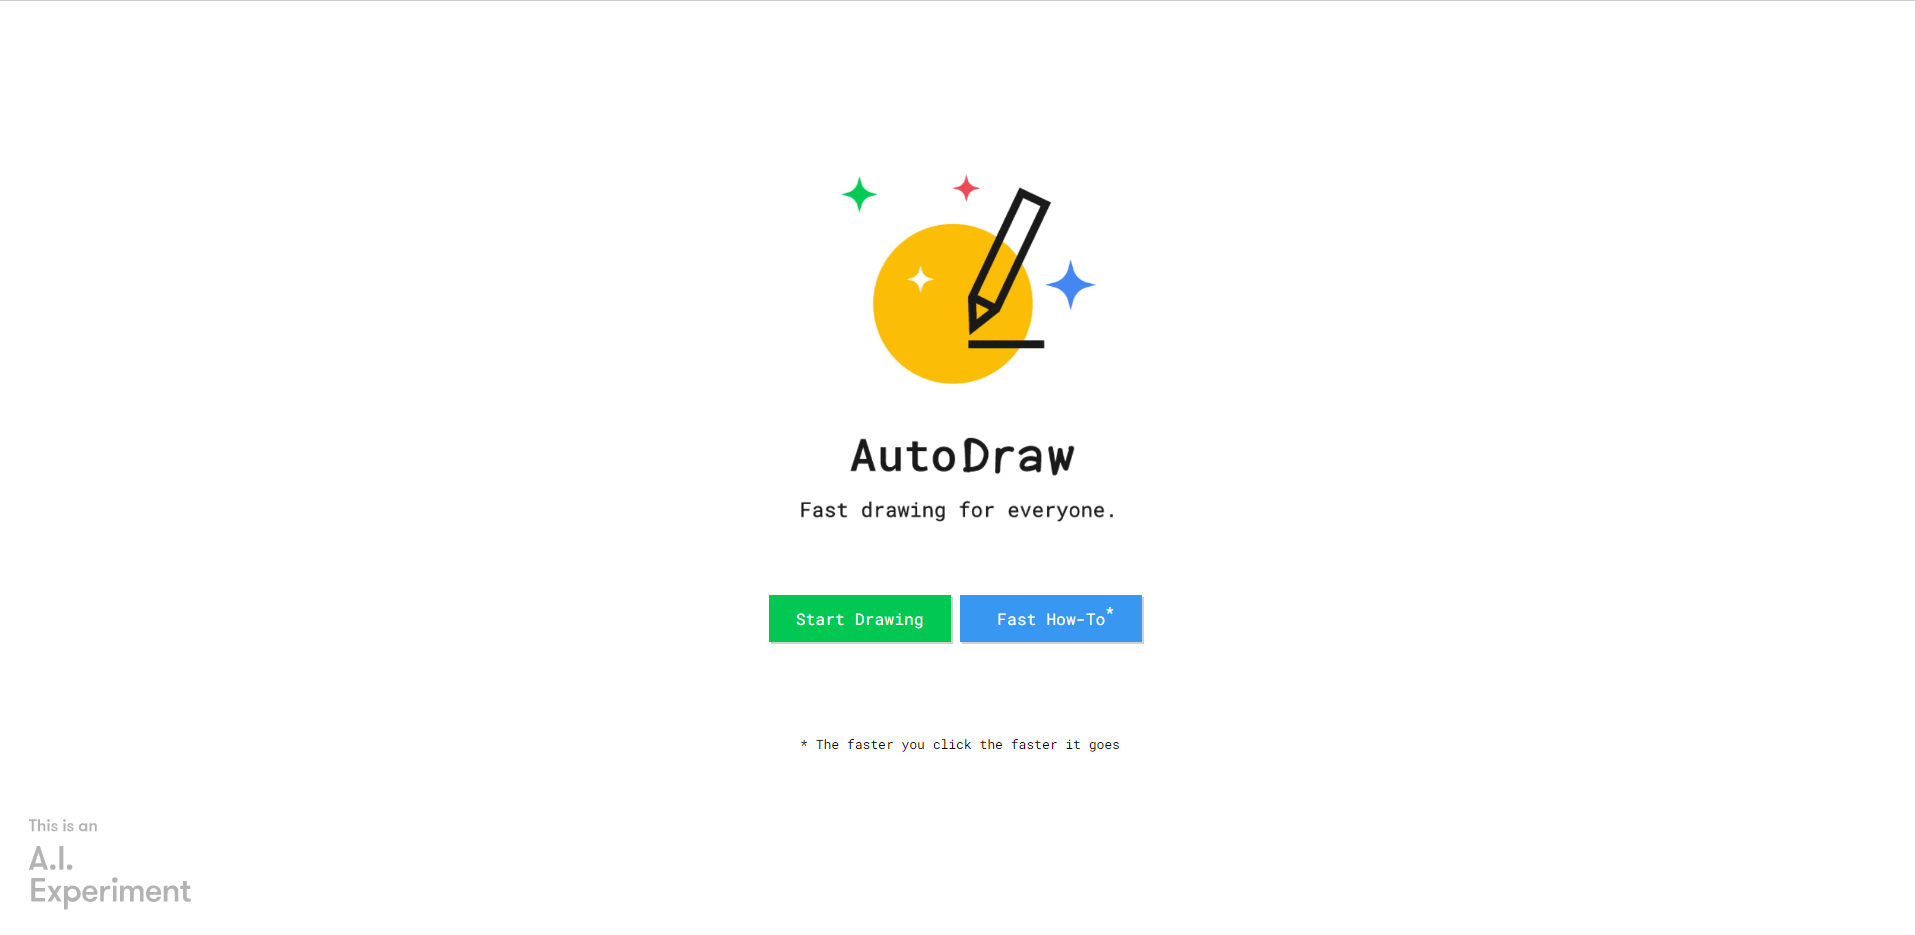 Auto Draw's homepag to draw fast and have a amazing drawing experience with AI